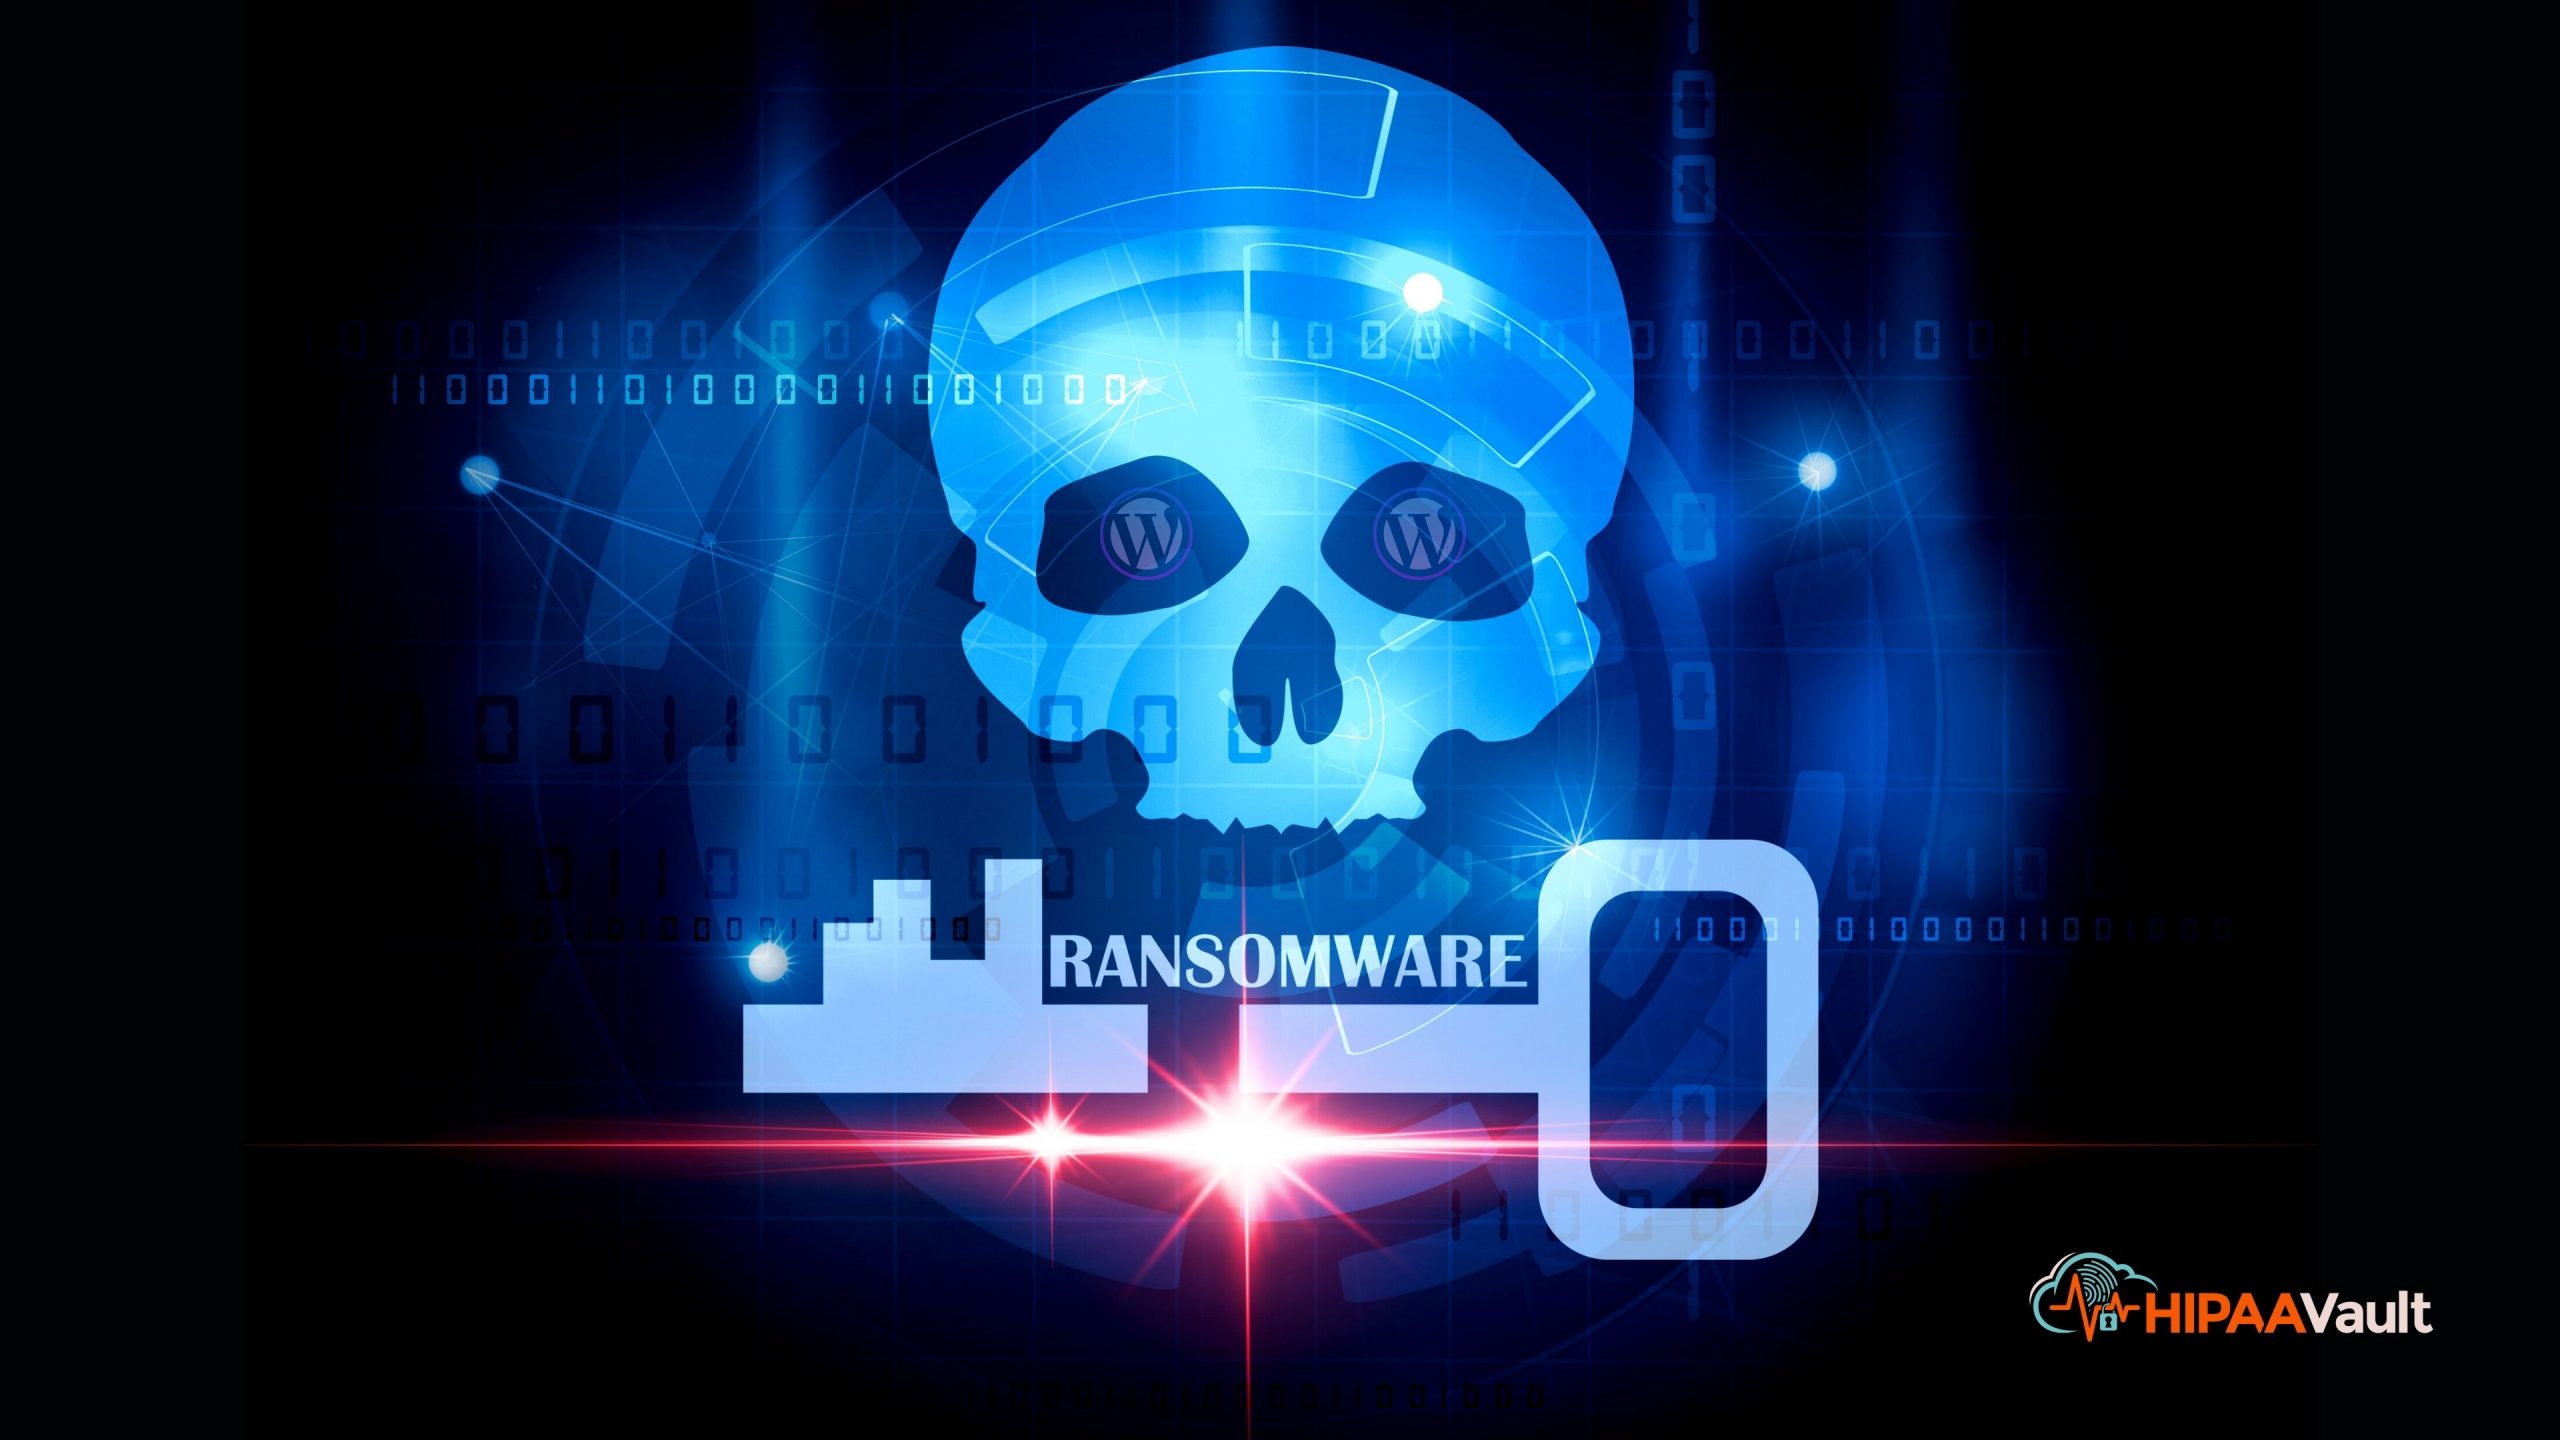 How Unsecured WordPress Infected a Clinic with Ransomware